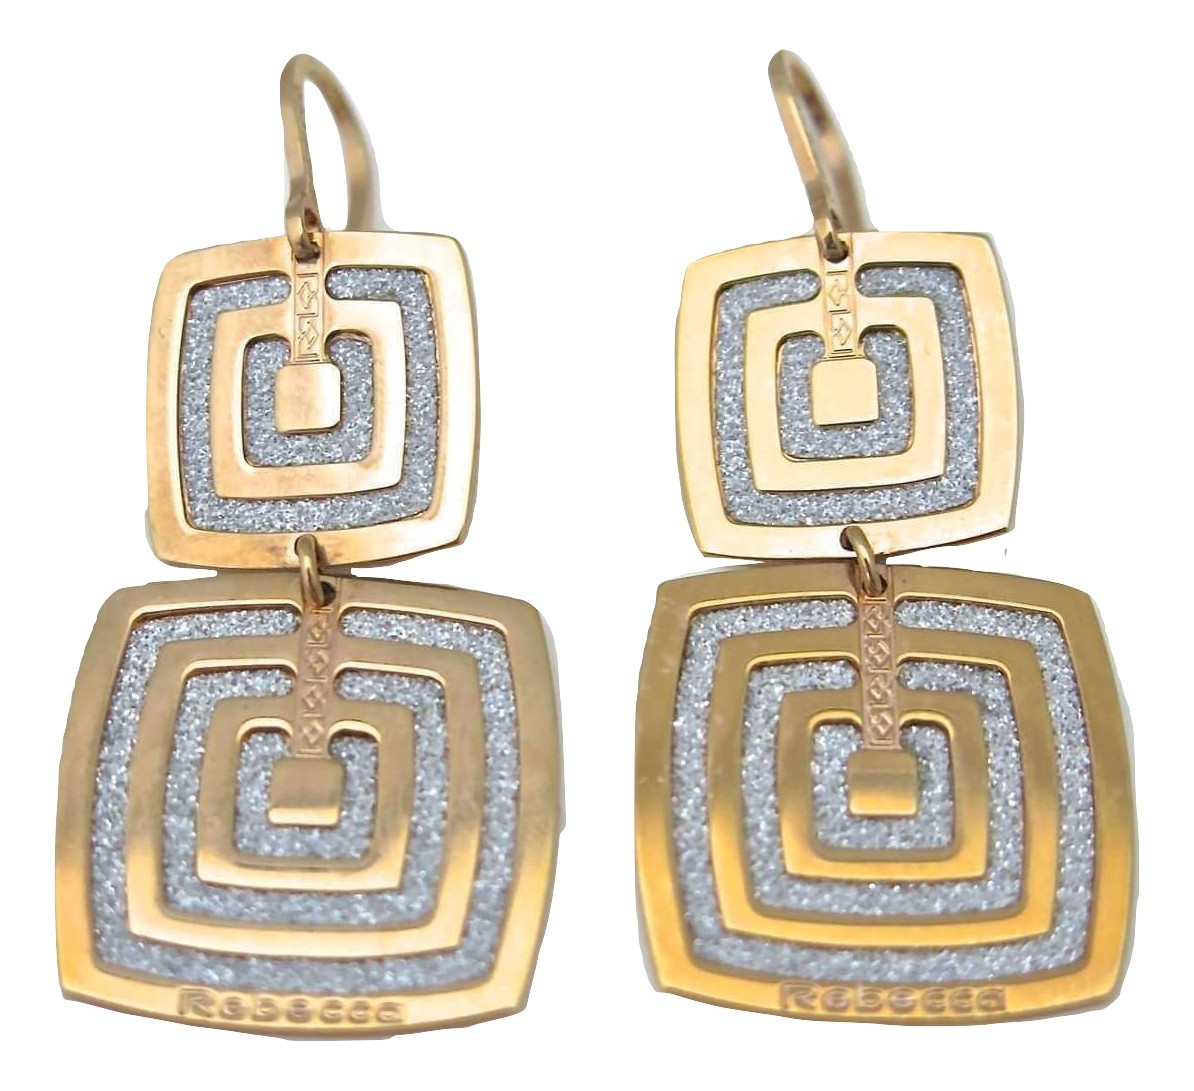 Dervivea Large Square Drop Earrings Minimalist Hollow Square Hoop Earrings  Gold Geometric Dangle Earrings Big Square Huggie Hoop Earring Jewelry for  Women and Girls : Amazon.co.uk: Fashion